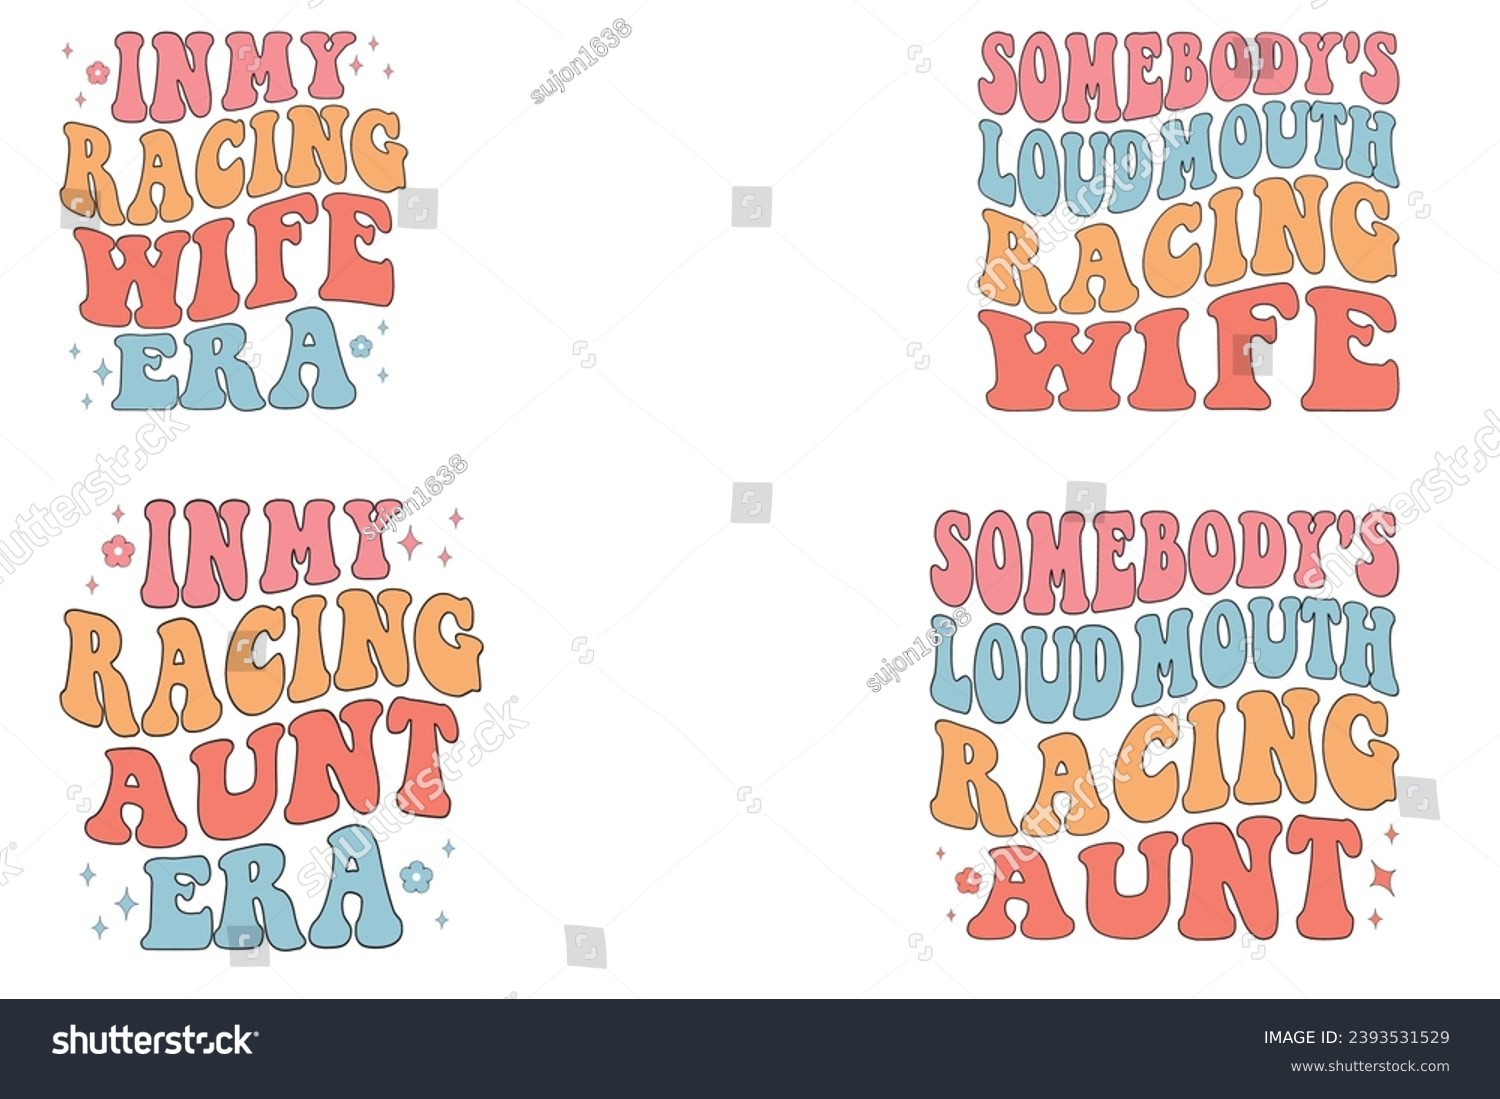 SVG of  In My Racing wife Era, Somebody's Loud MOUTH Racing wife, In My Racing aunt Era, Somebody's Loud MOUTH Racing aunt retro wavy T-shirt svg